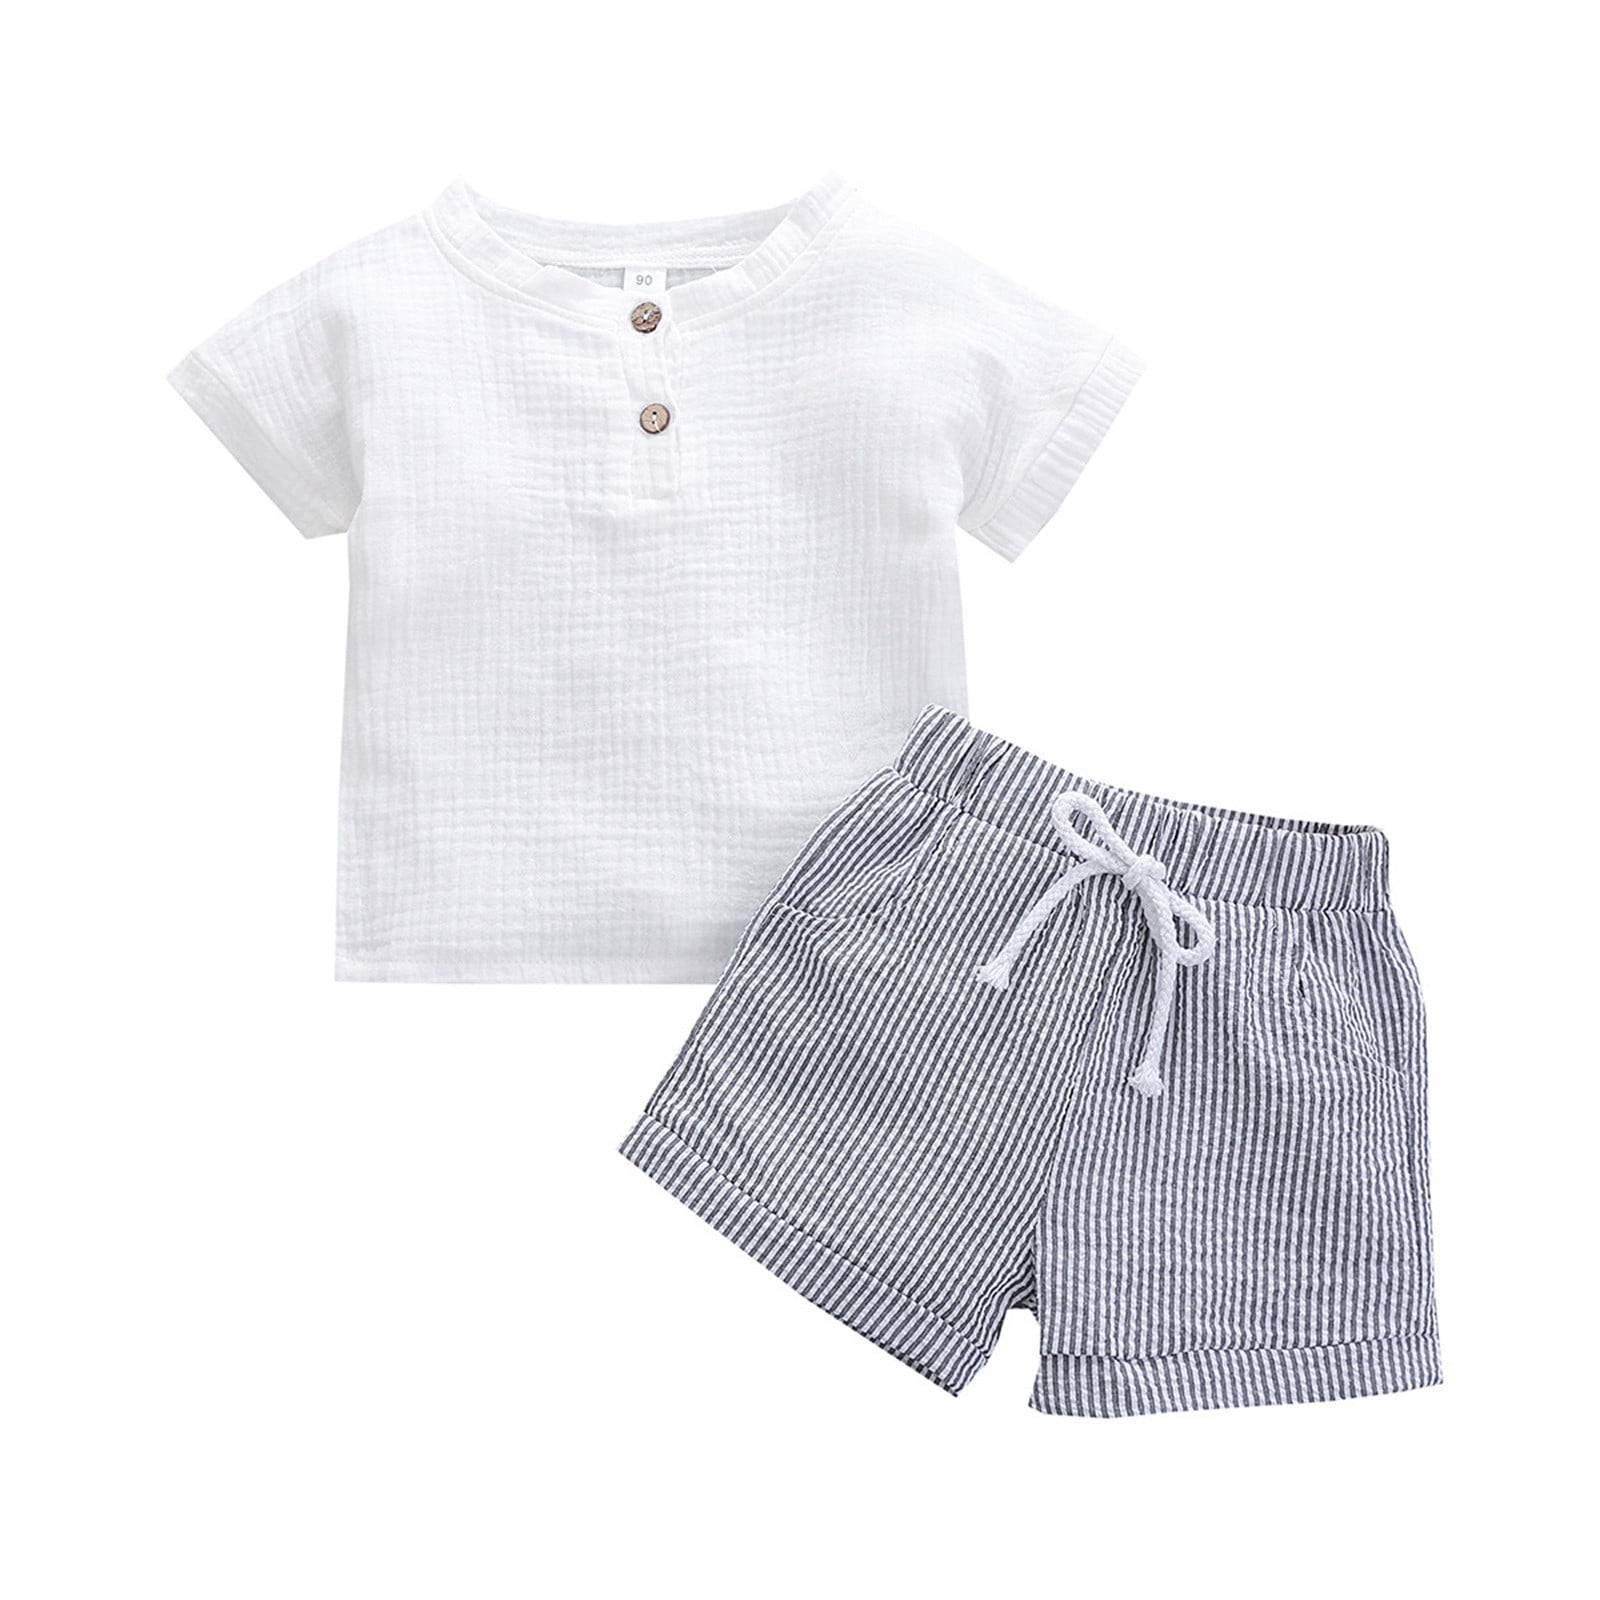 Cathalem Summer Clothes Set for Children Toddler Girls Casual Top and ...